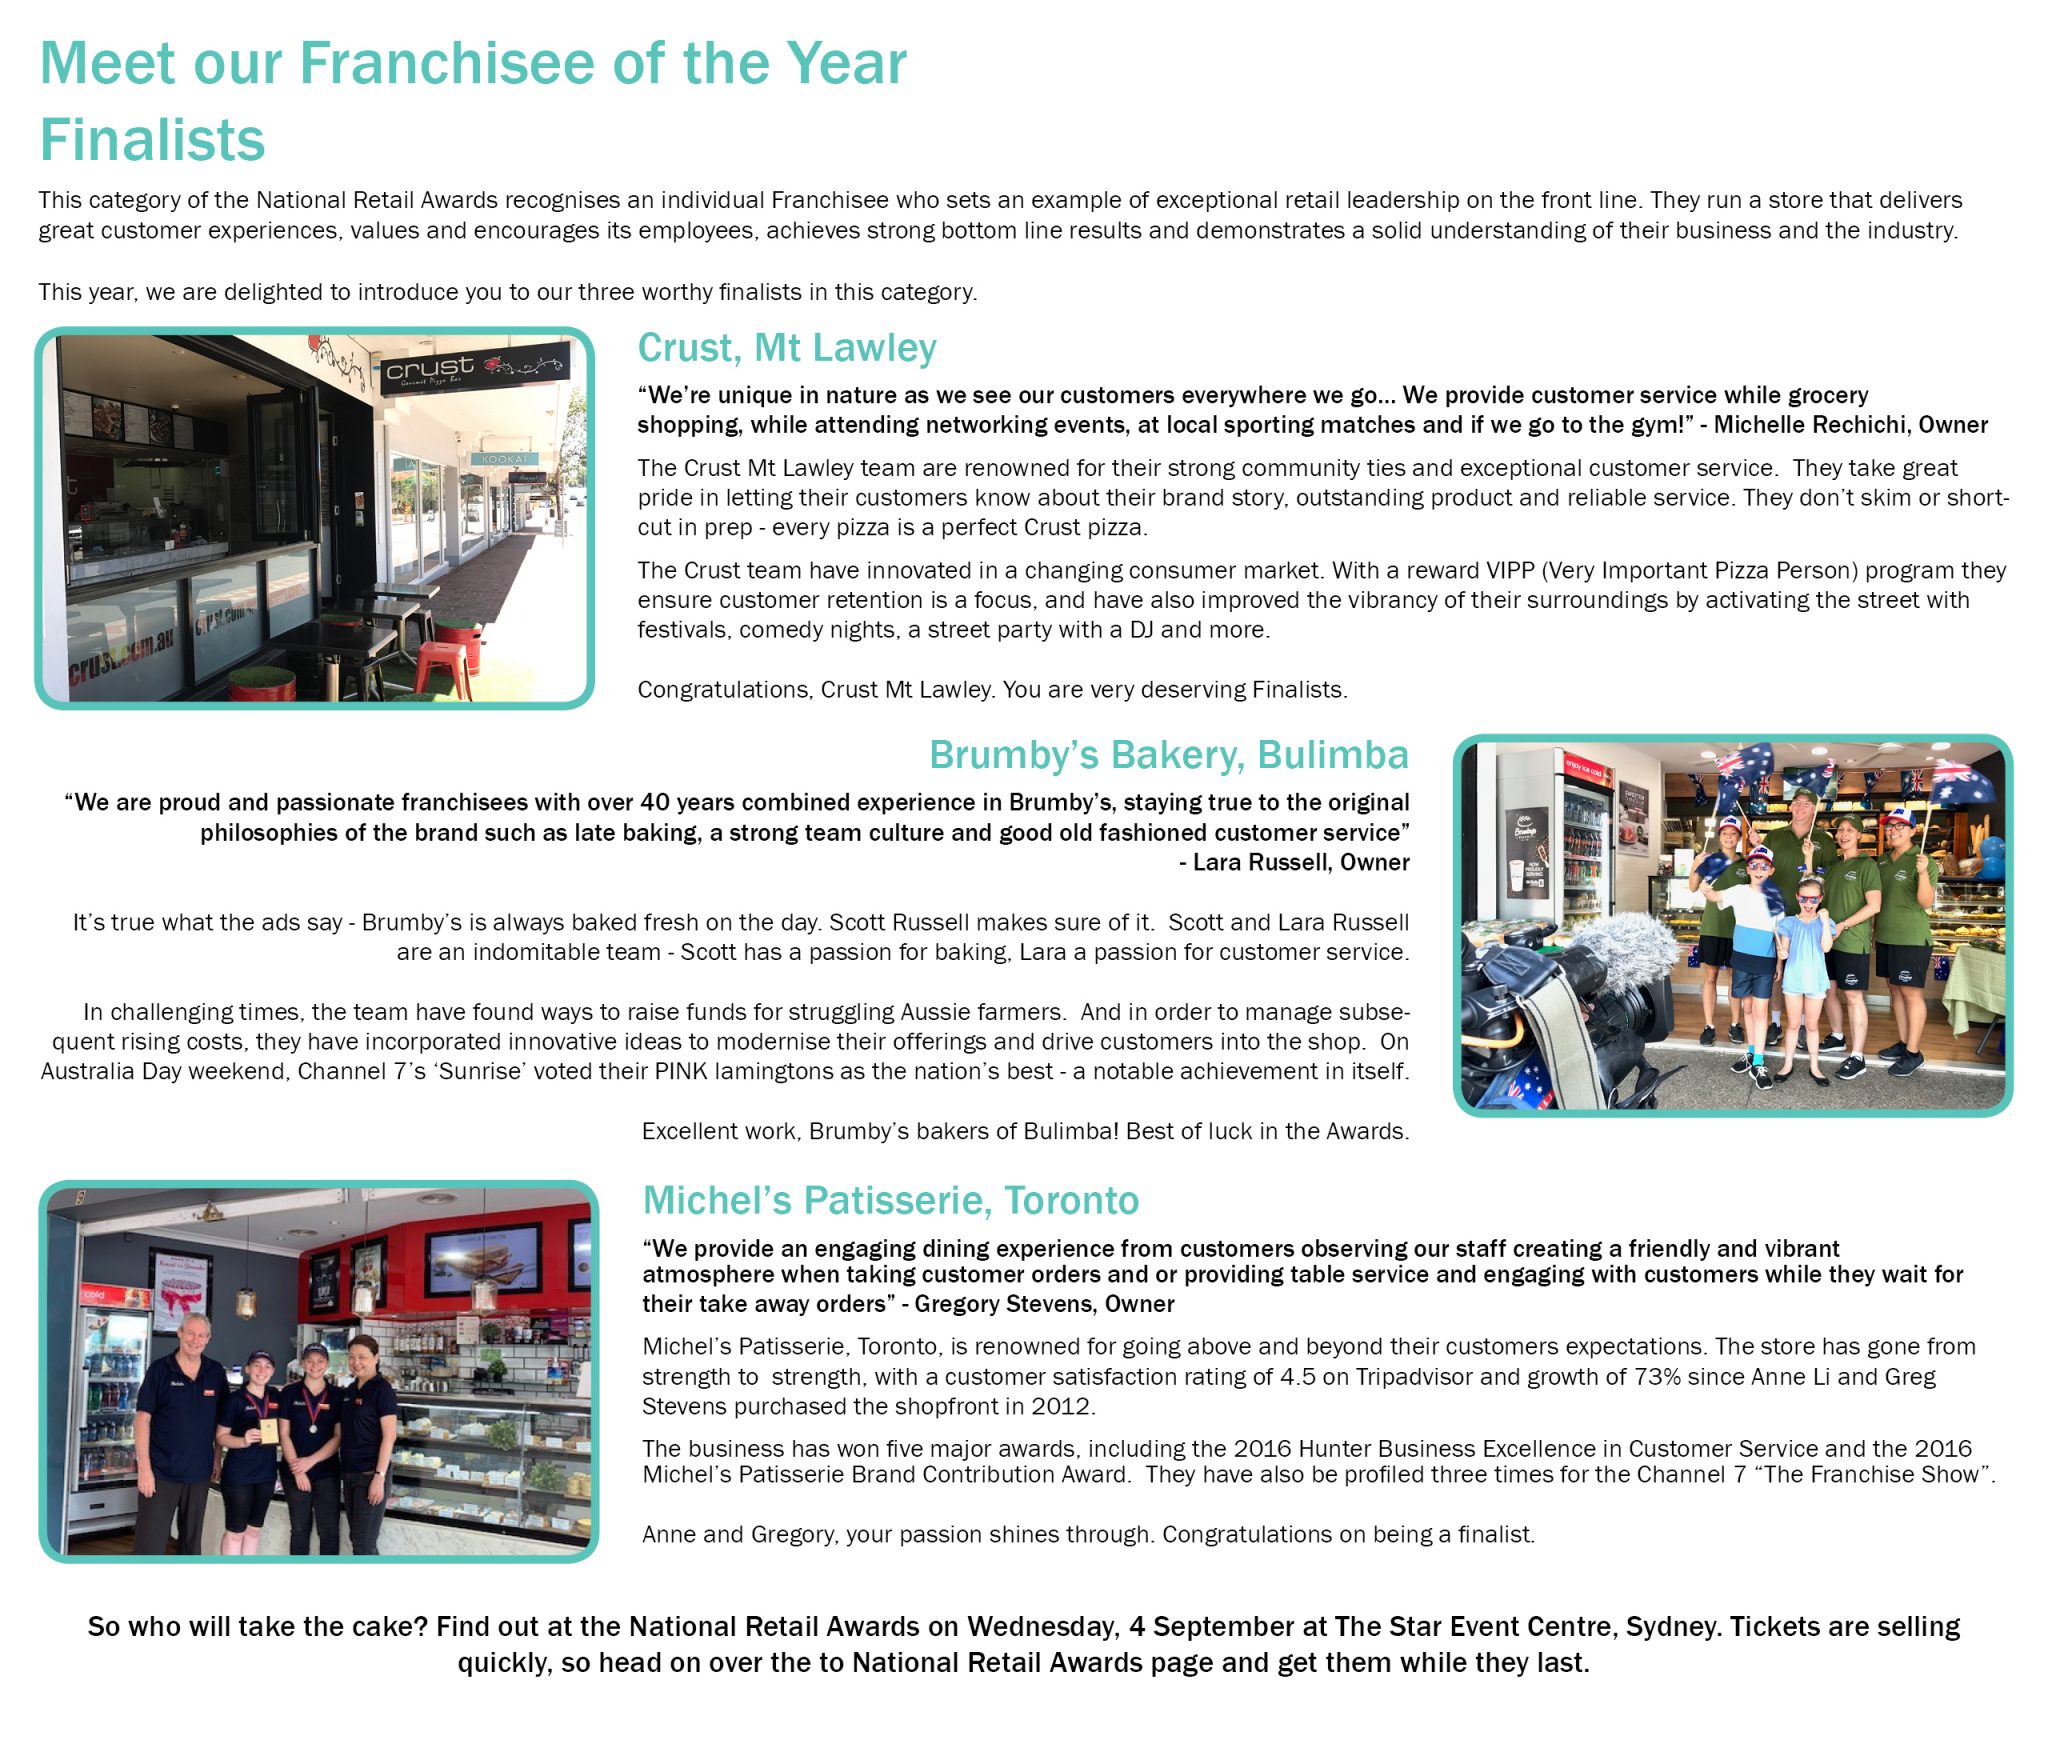 franchisee of the year national retail awards association